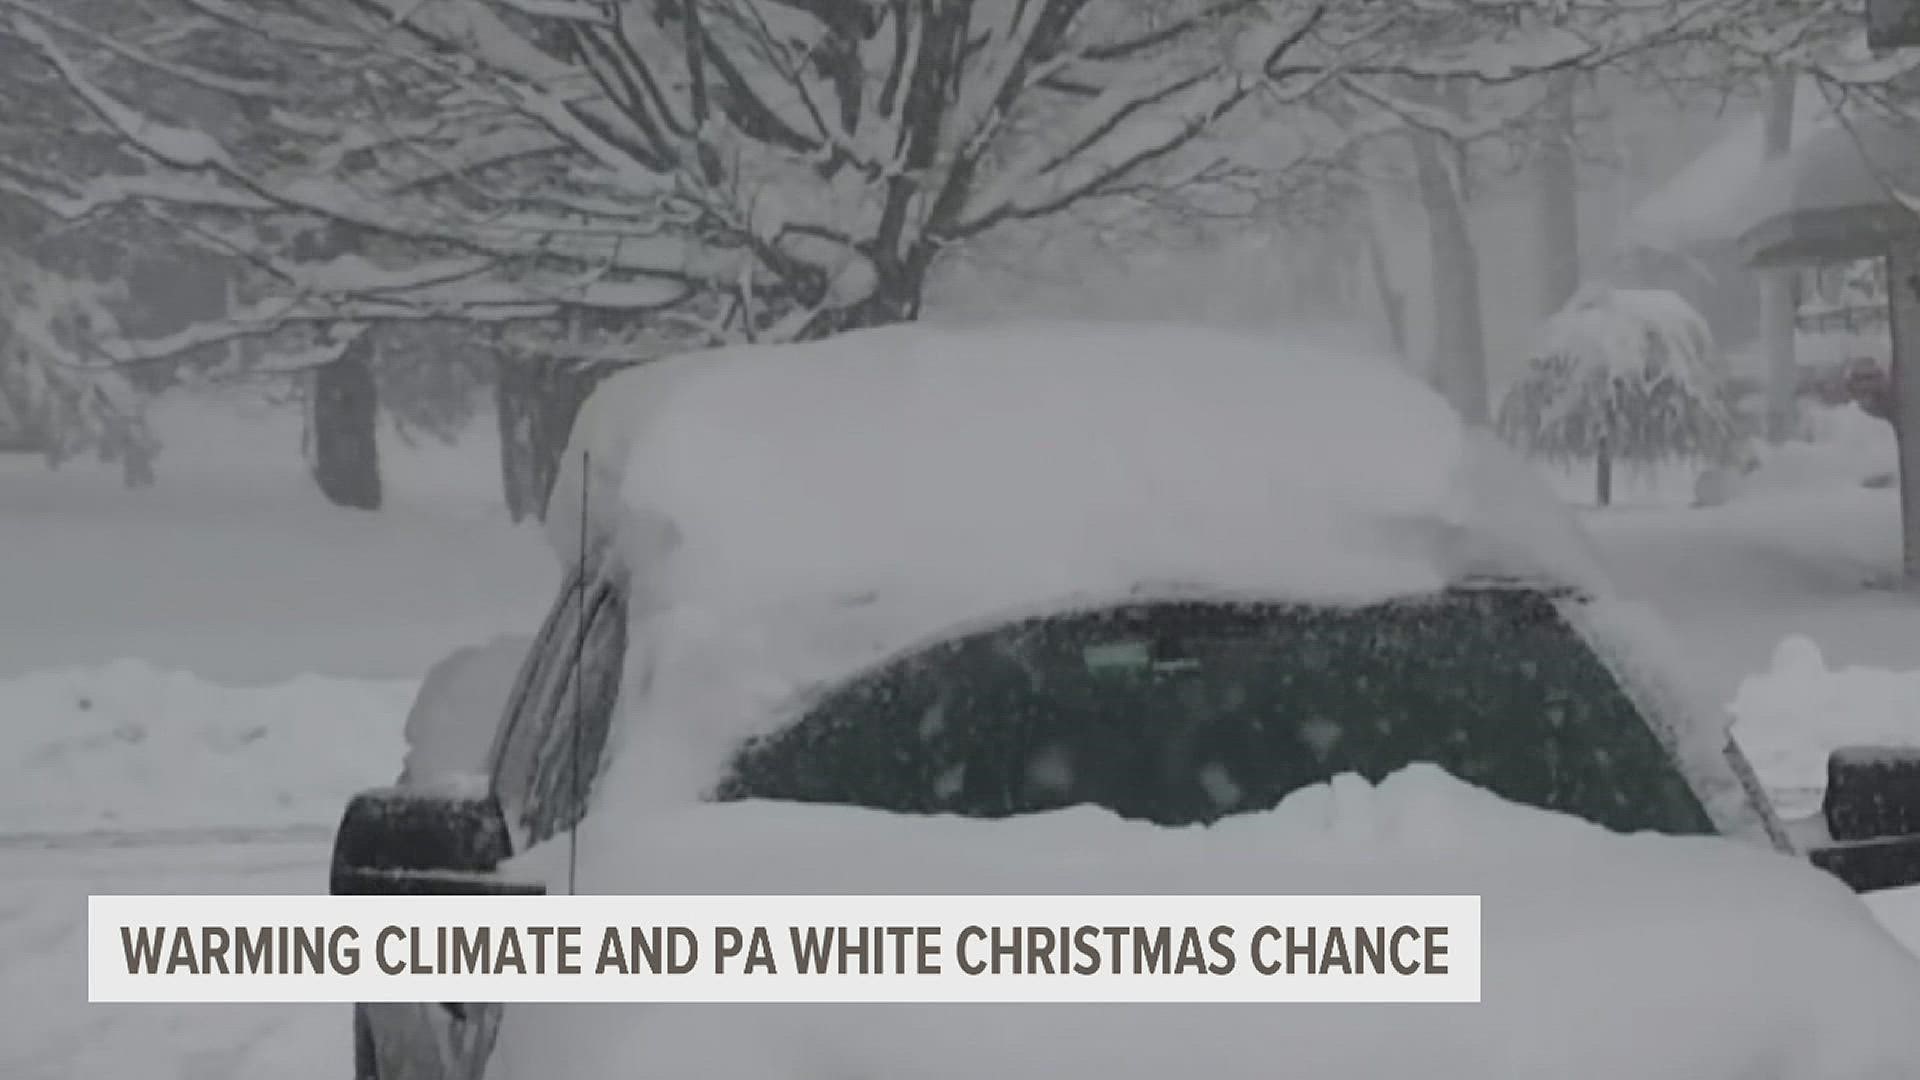 Data from the National Oceanic and Atmospheric Administration shows Harrisburg's chance for a "White Christmas" is on the low end, but it's not impossible!